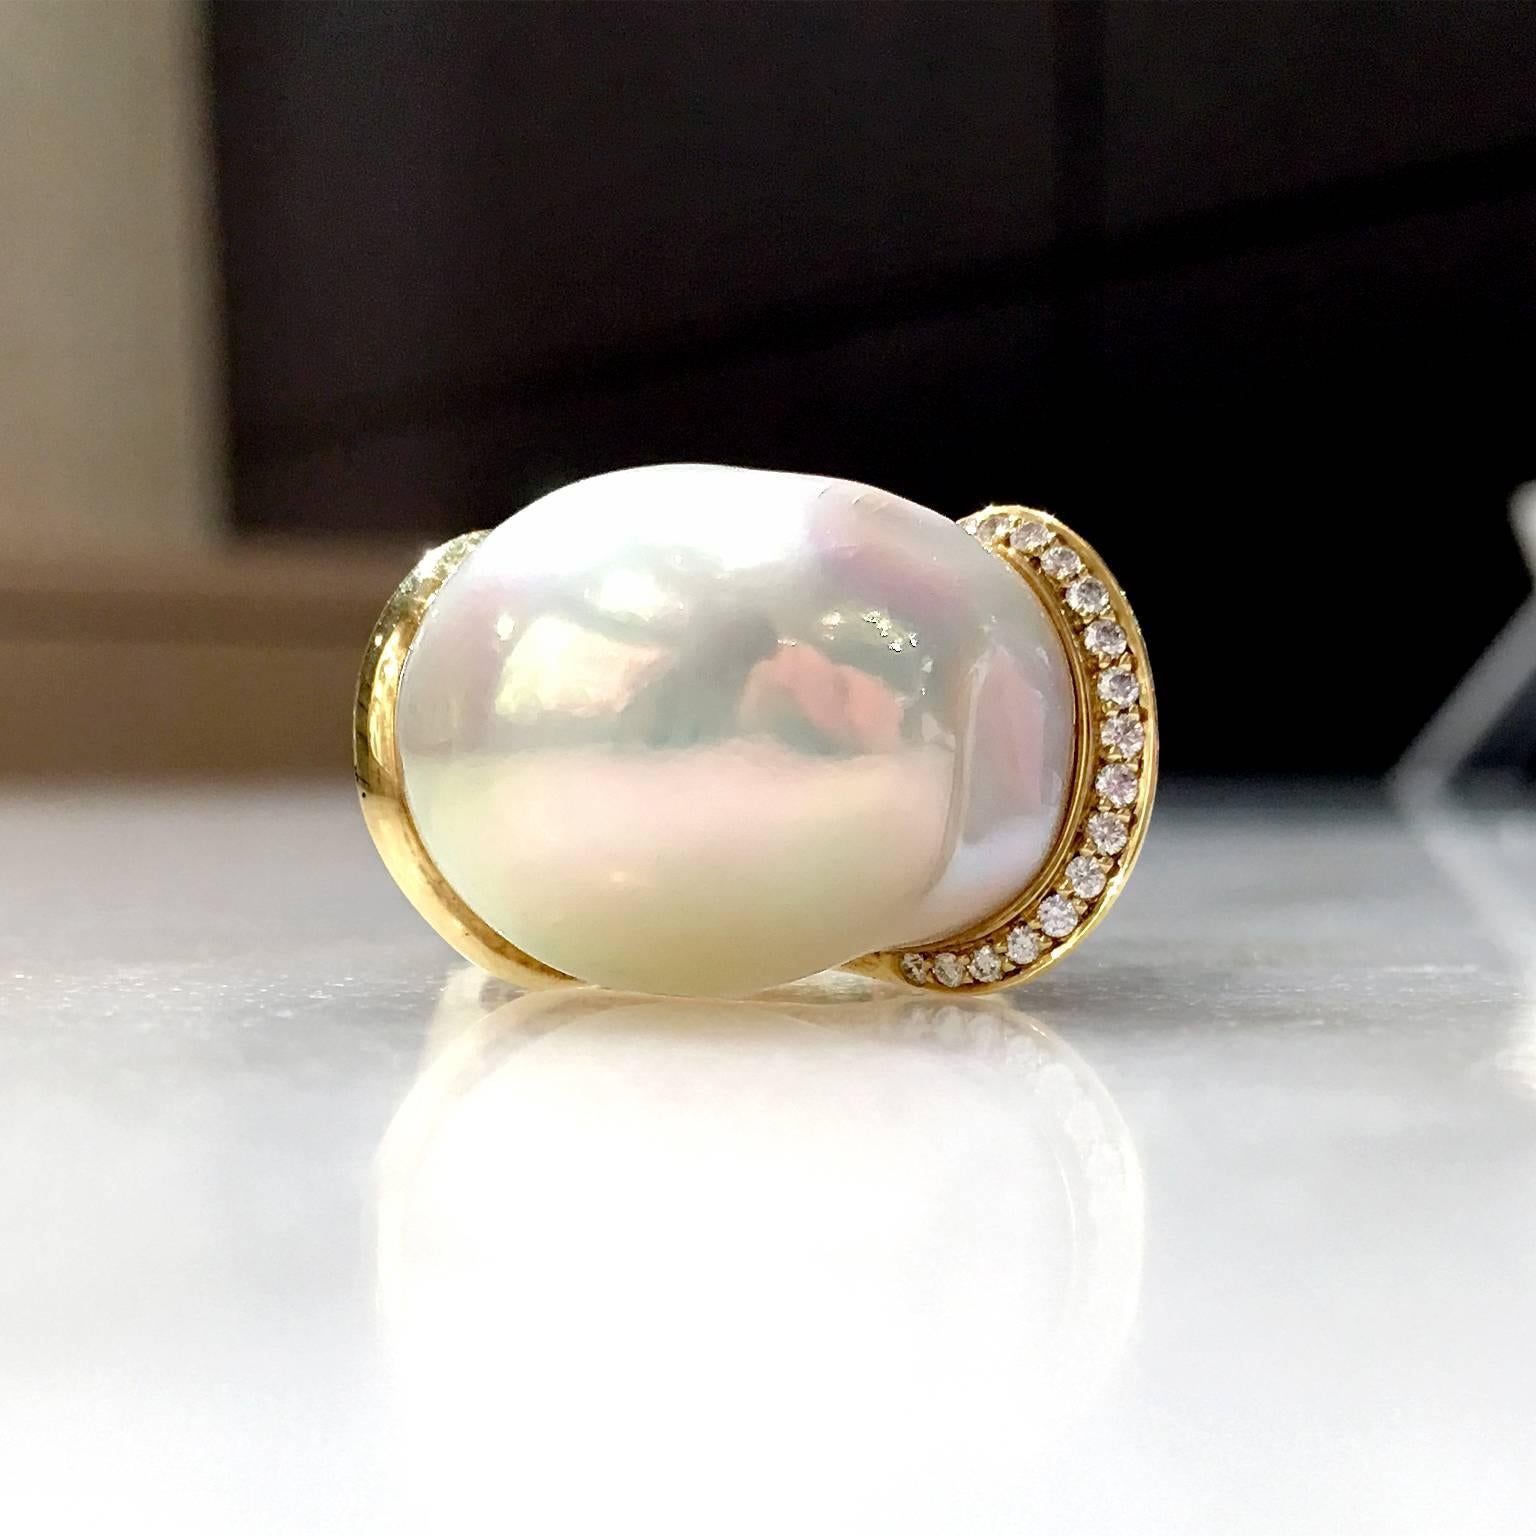 One-of-a-Kind Diamond Curve Ring handcrafted in 18.5k yellow gold with a lustrous and colorful white freshwater pearl uniquely wrapped with 0.12 carats of F/vs1 round brilliant-cut white diamonds. Size 7.25 (Can be sized).
